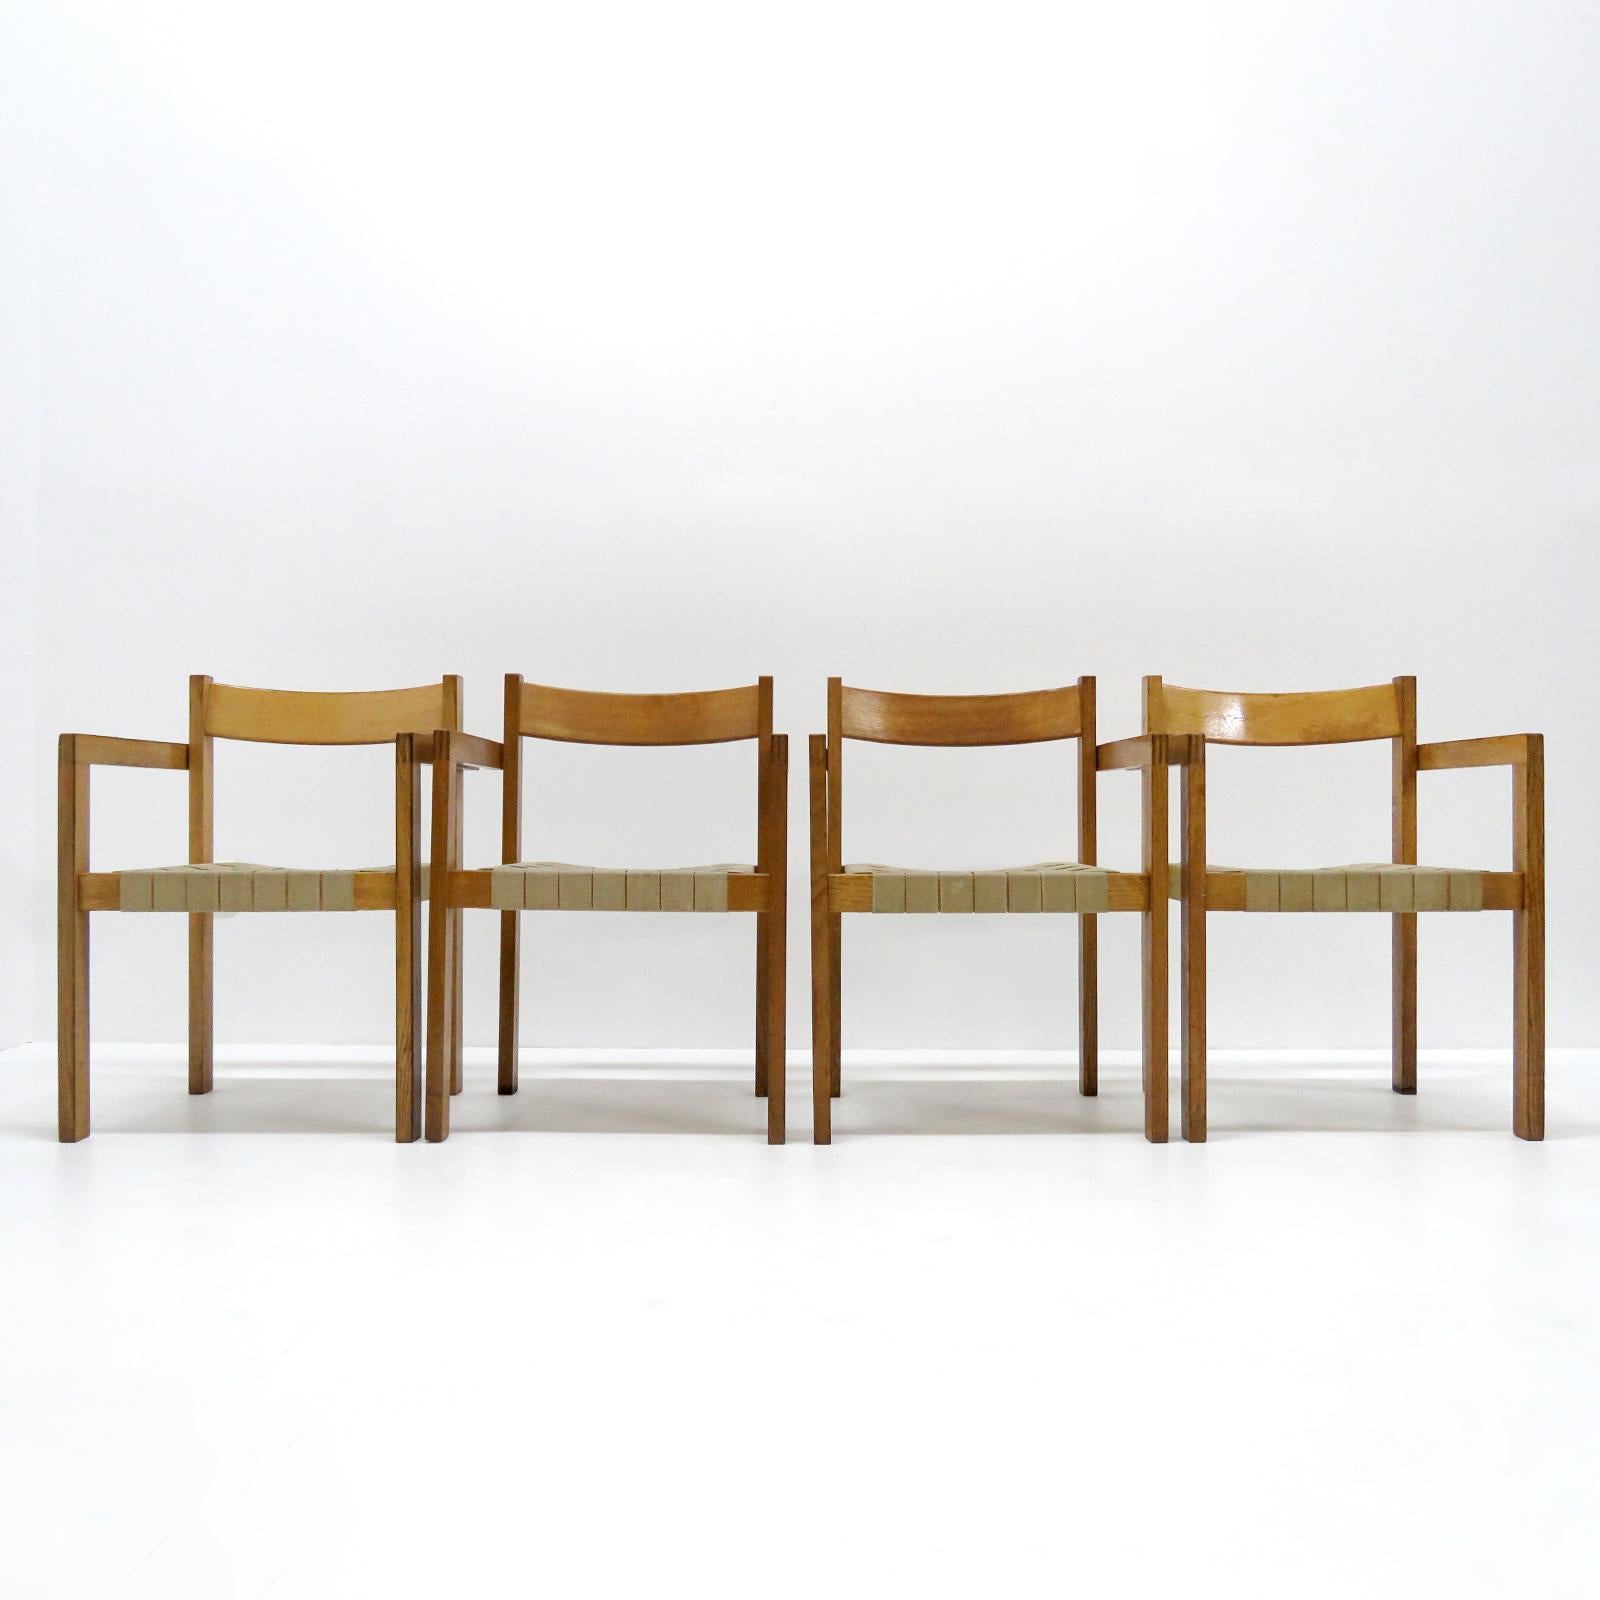 Wonderful 1960s dining chairs by Hans Wegner for GETAMA, with arms, in oak with straps of hemp, great patina, very comfortable. Priced individually. 3 chairs available.